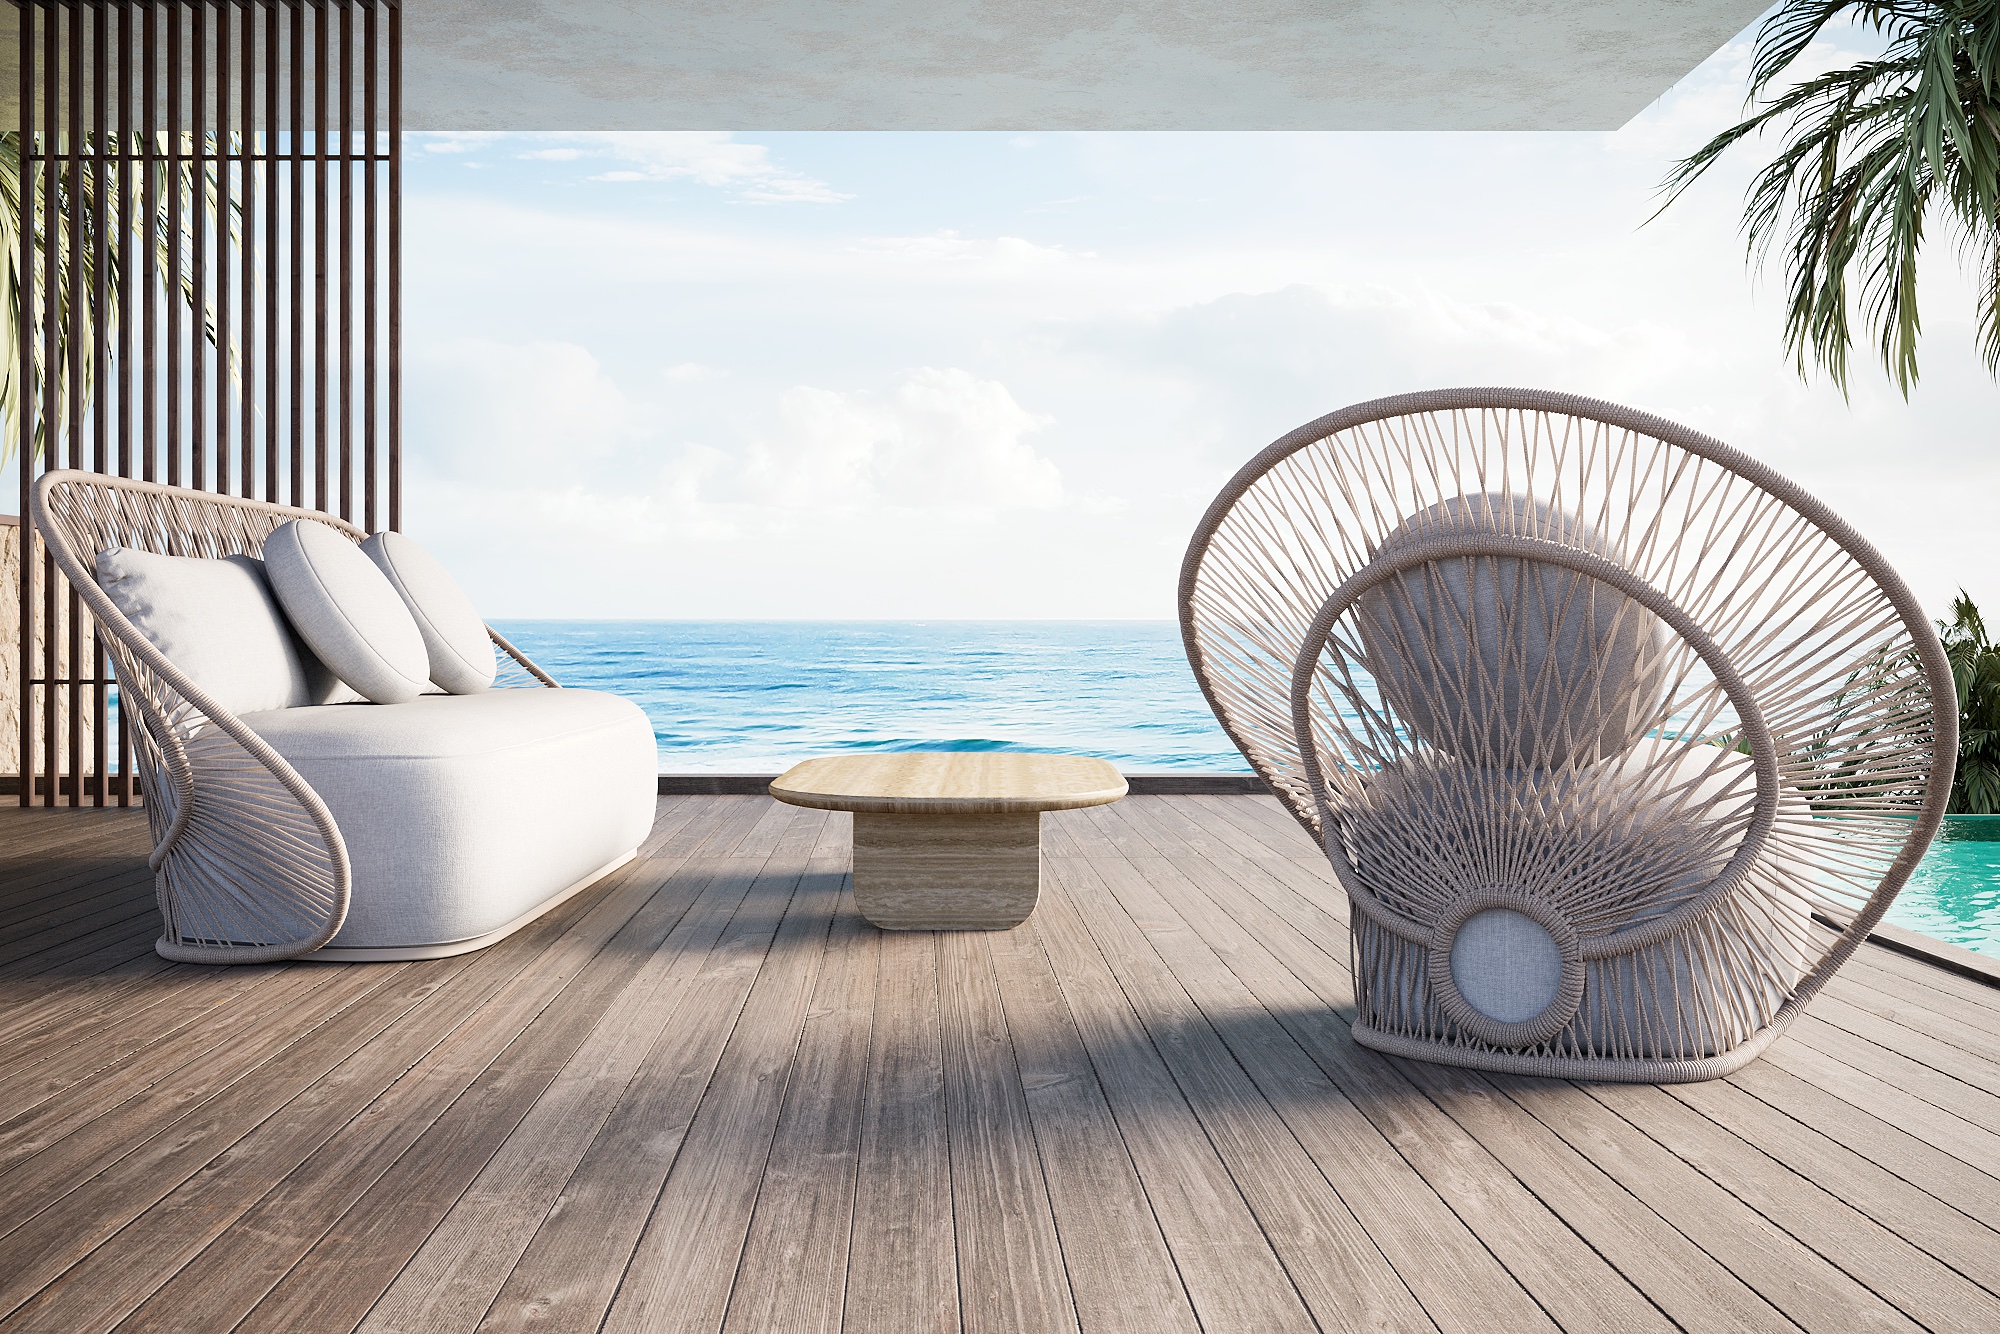 Back view of Radial rope indoor outdoor chair on seaside deck . designed by Marcel Wanders studio Maui Collection for Harbour for all season use